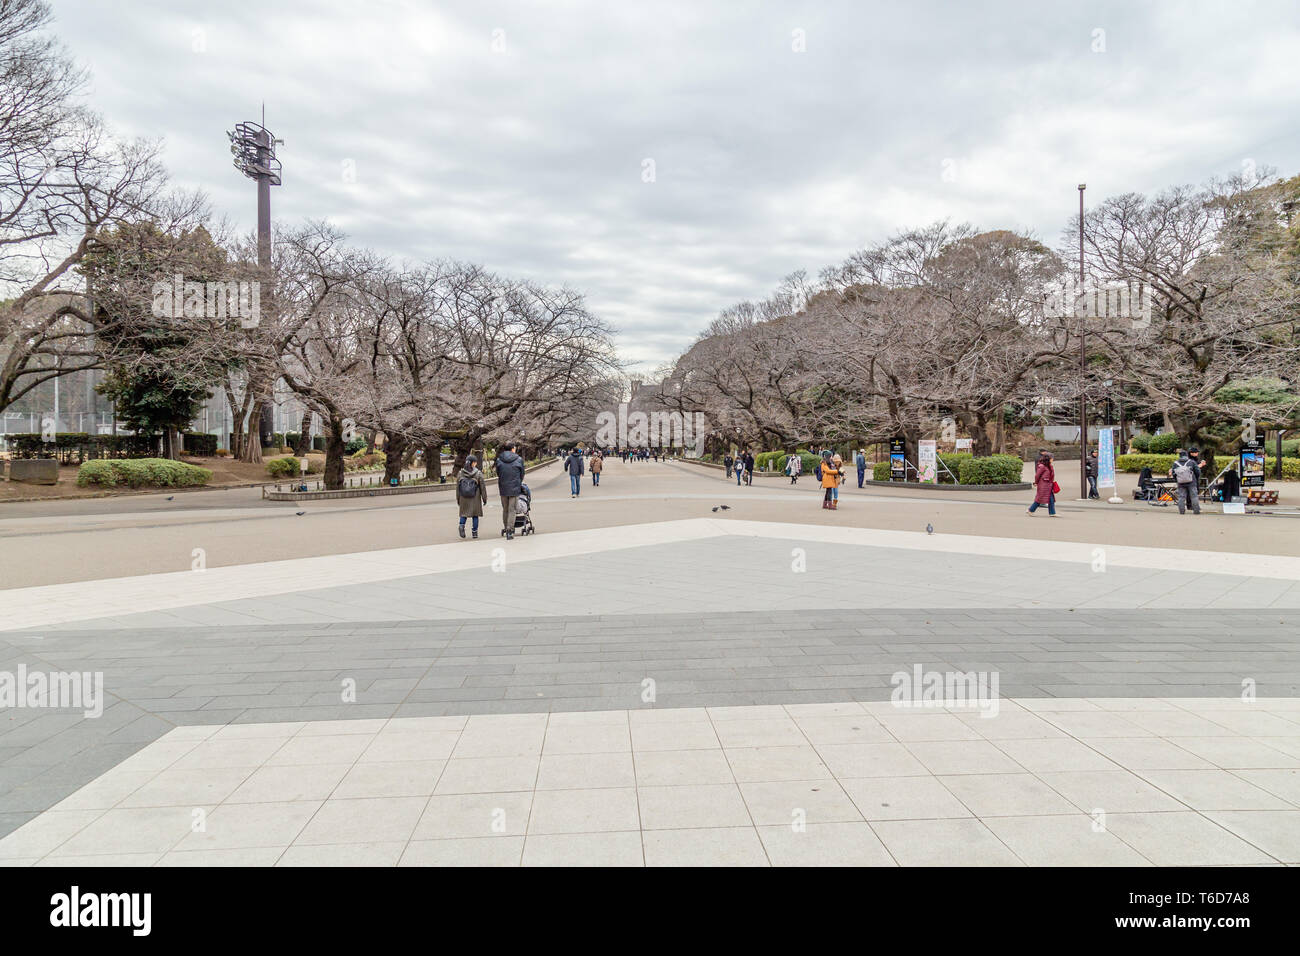 TOKYO, JAPAN - FEBRUARY 8, 2019: Unidentified people walking around Ueno Onshi Park. Ueno Park is a public park in Ueno area, northern Tokyo. The park Stock Photo